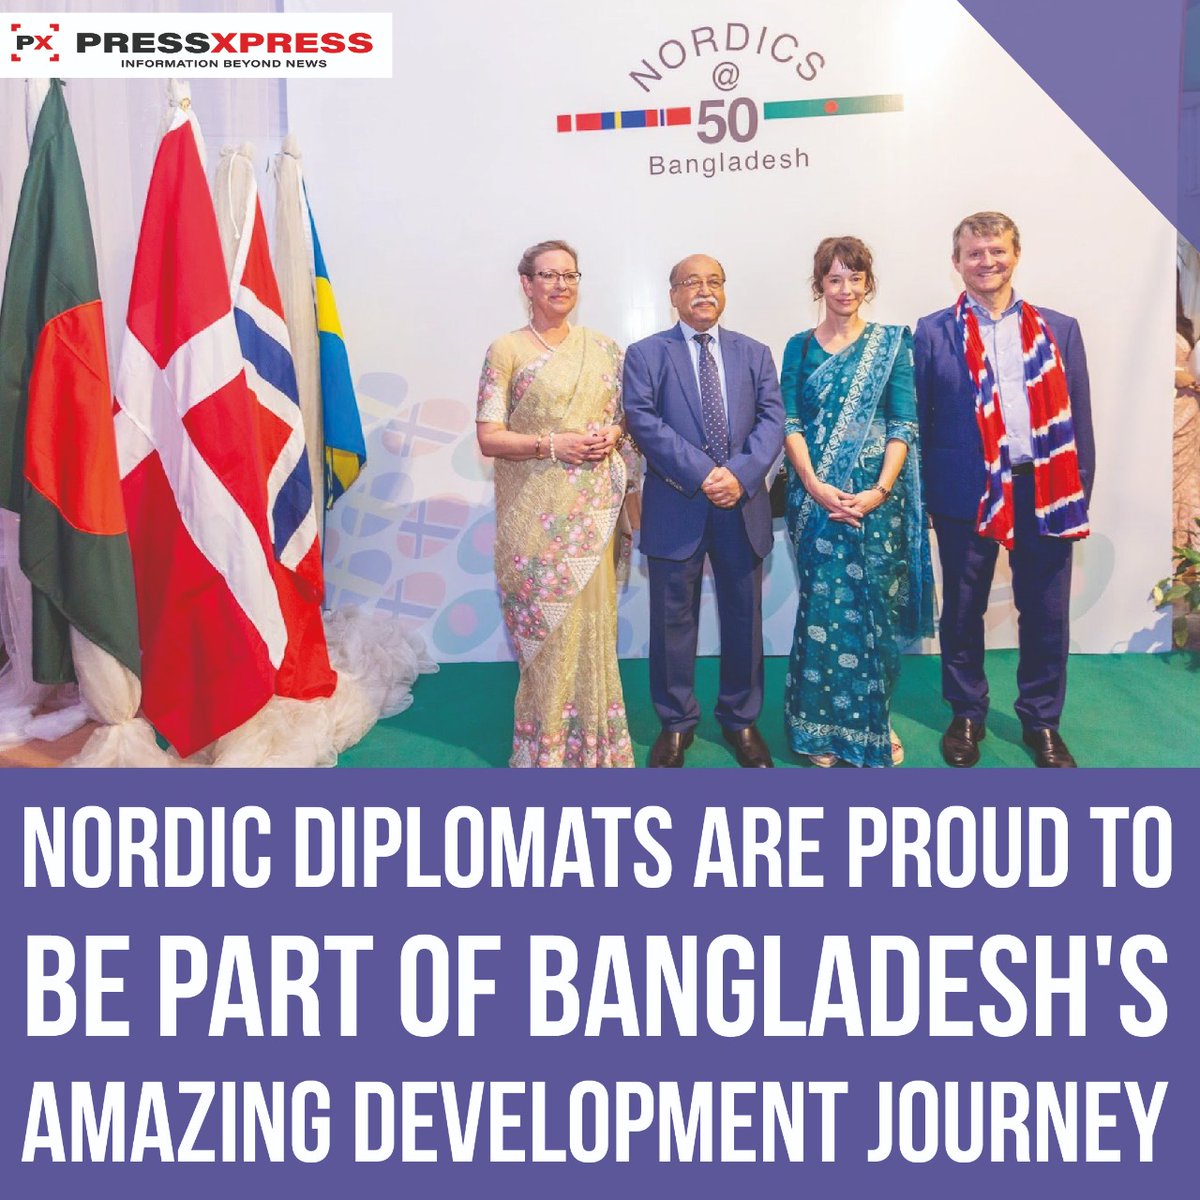 #Nordic ambassadors to Bangladesh have acknowledged the impressive #development journey and growth of Bangladesh that they have witnessed throughout their steadfast relationships. 
@SwedeninBD @SwedenAmbBD #Nordics50BD
#Diplomat #Diplomatic #Embassy #Sweden  #Bangladesh